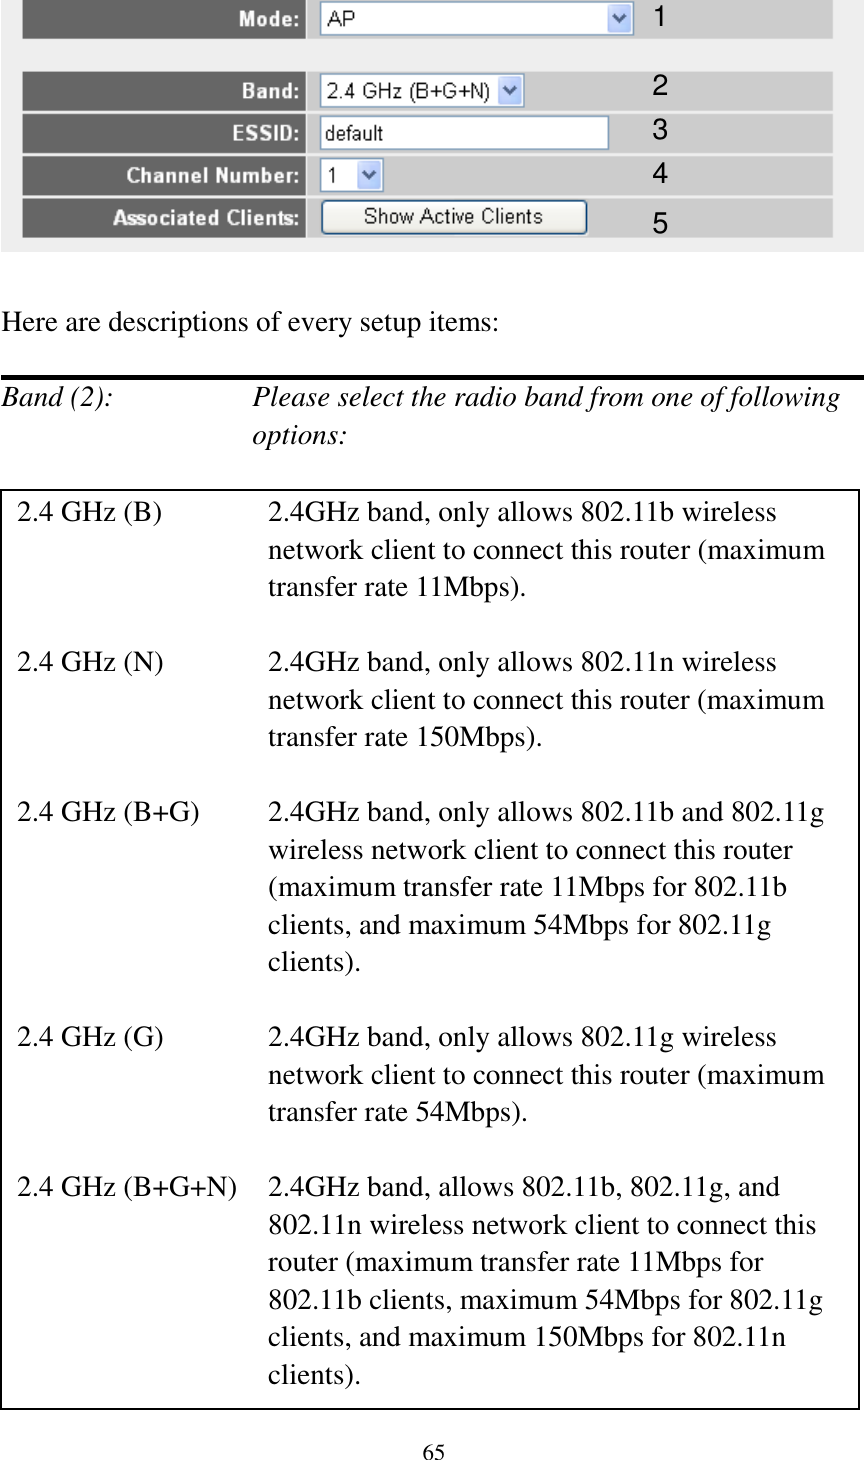 65   Here are descriptions of every setup items:  Band (2):    Please select the radio band from one of following options:                          1 2 3 4 2.4 GHz (B)  2.4GHz band, only allows 802.11b wireless network client to connect this router (maximum transfer rate 11Mbps).  2.4 GHz (N)  2.4GHz band, only allows 802.11n wireless network client to connect this router (maximum transfer rate 150Mbps).  2.4 GHz (B+G)    2.4GHz band, only allows 802.11b and 802.11g wireless network client to connect this router (maximum transfer rate 11Mbps for 802.11b clients, and maximum 54Mbps for 802.11g clients).  2.4 GHz (G)    2.4GHz band, only allows 802.11g wireless network client to connect this router (maximum transfer rate 54Mbps).  2.4 GHz (B+G+N)    2.4GHz band, allows 802.11b, 802.11g, and 802.11n wireless network client to connect this router (maximum transfer rate 11Mbps for 802.11b clients, maximum 54Mbps for 802.11g clients, and maximum 150Mbps for 802.11n clients).   5 